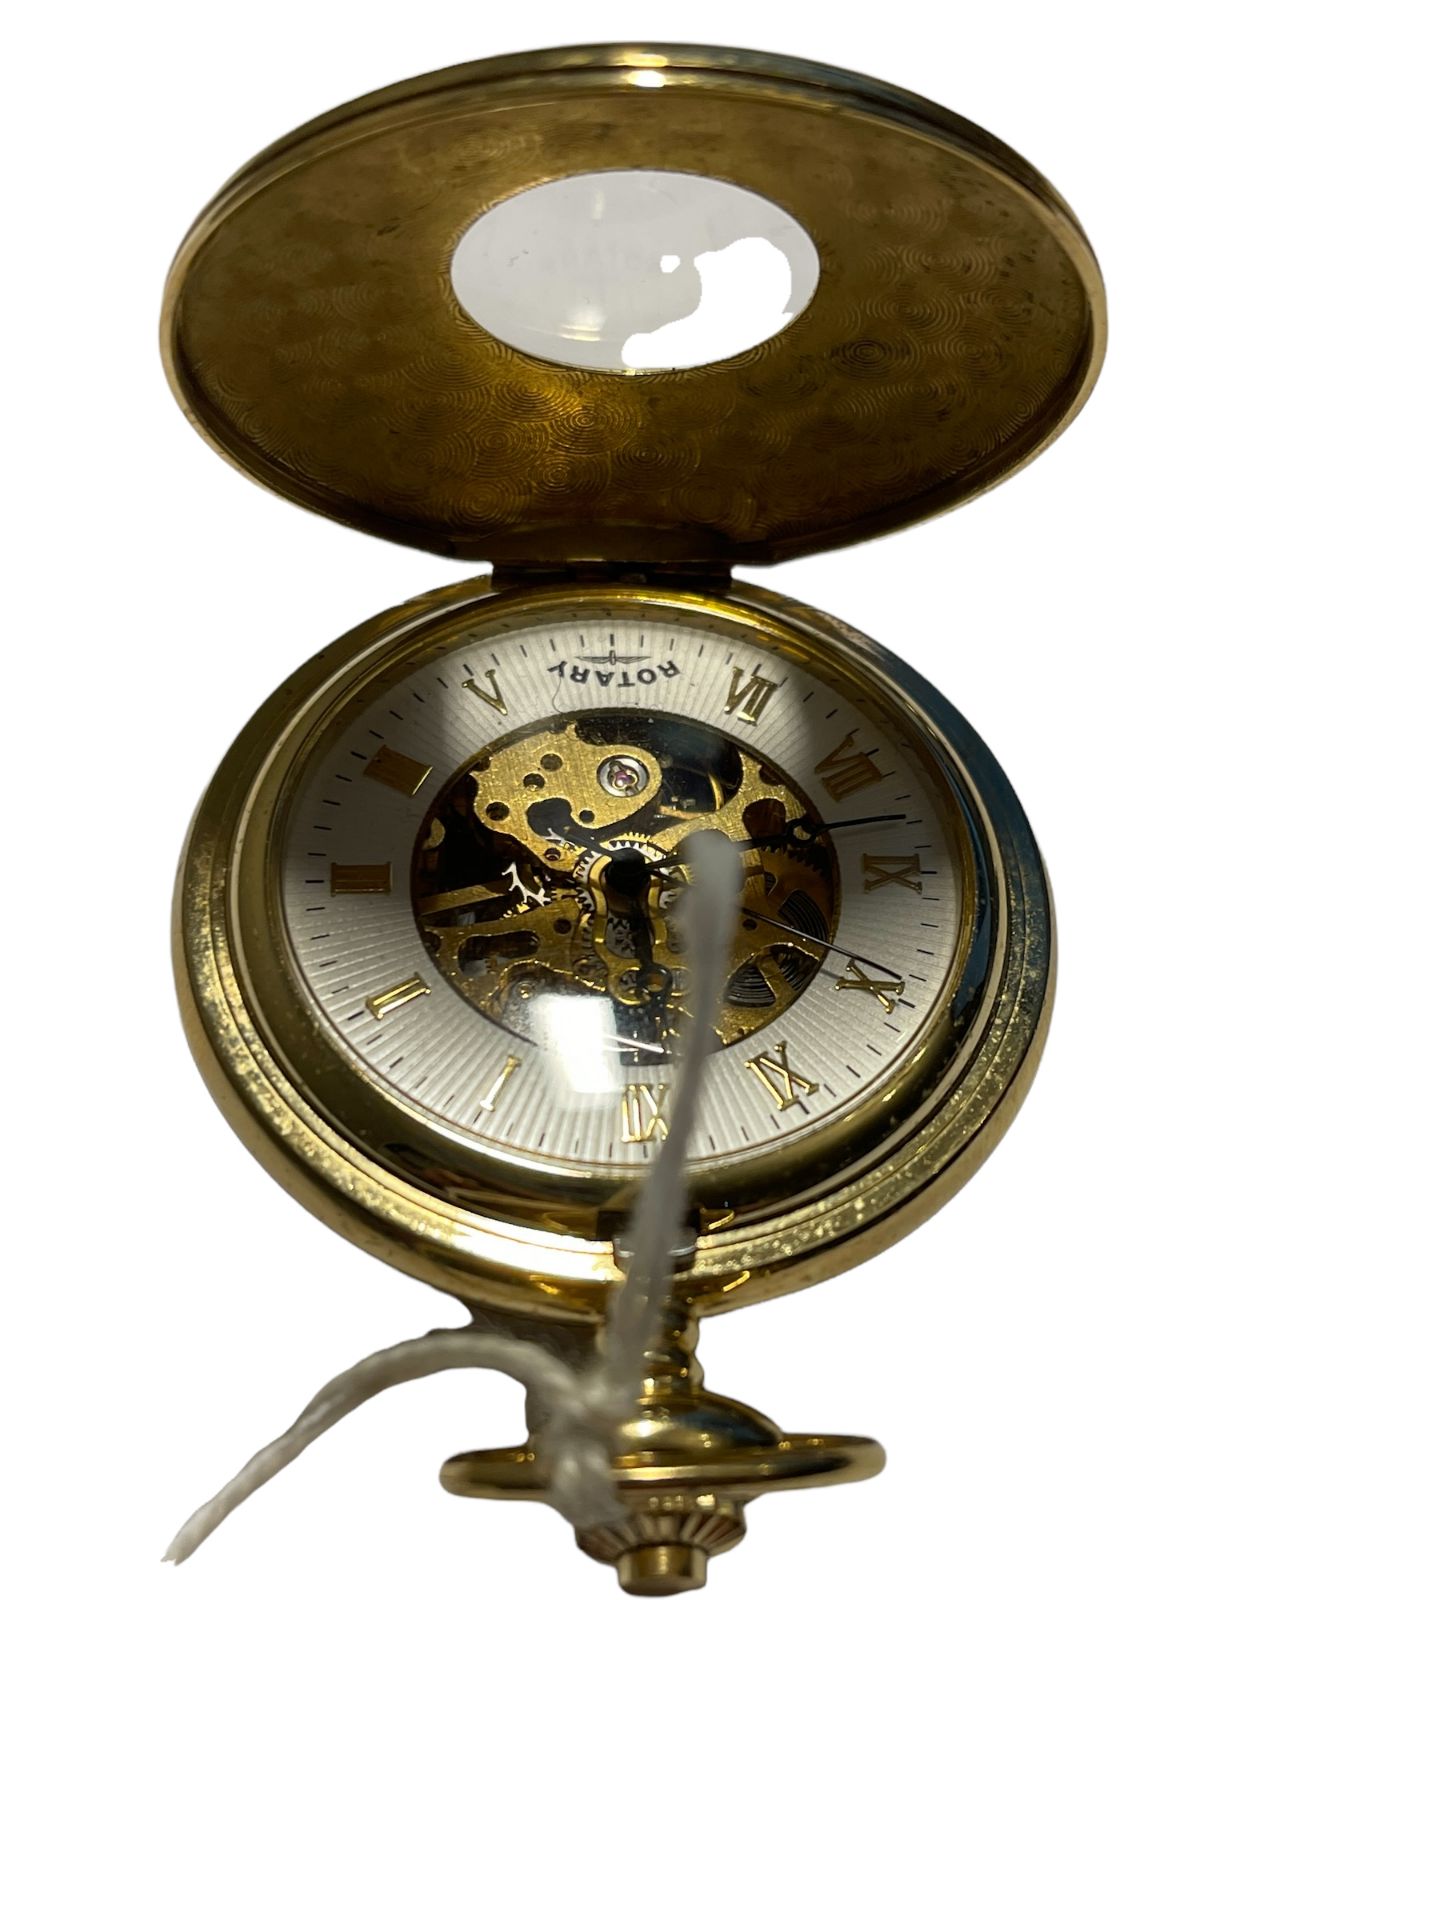 Gold Plated Mechanical Rotary Pocket Watch RRP £209 - Ex Demo from our Private Jet Charter - Image 3 of 11